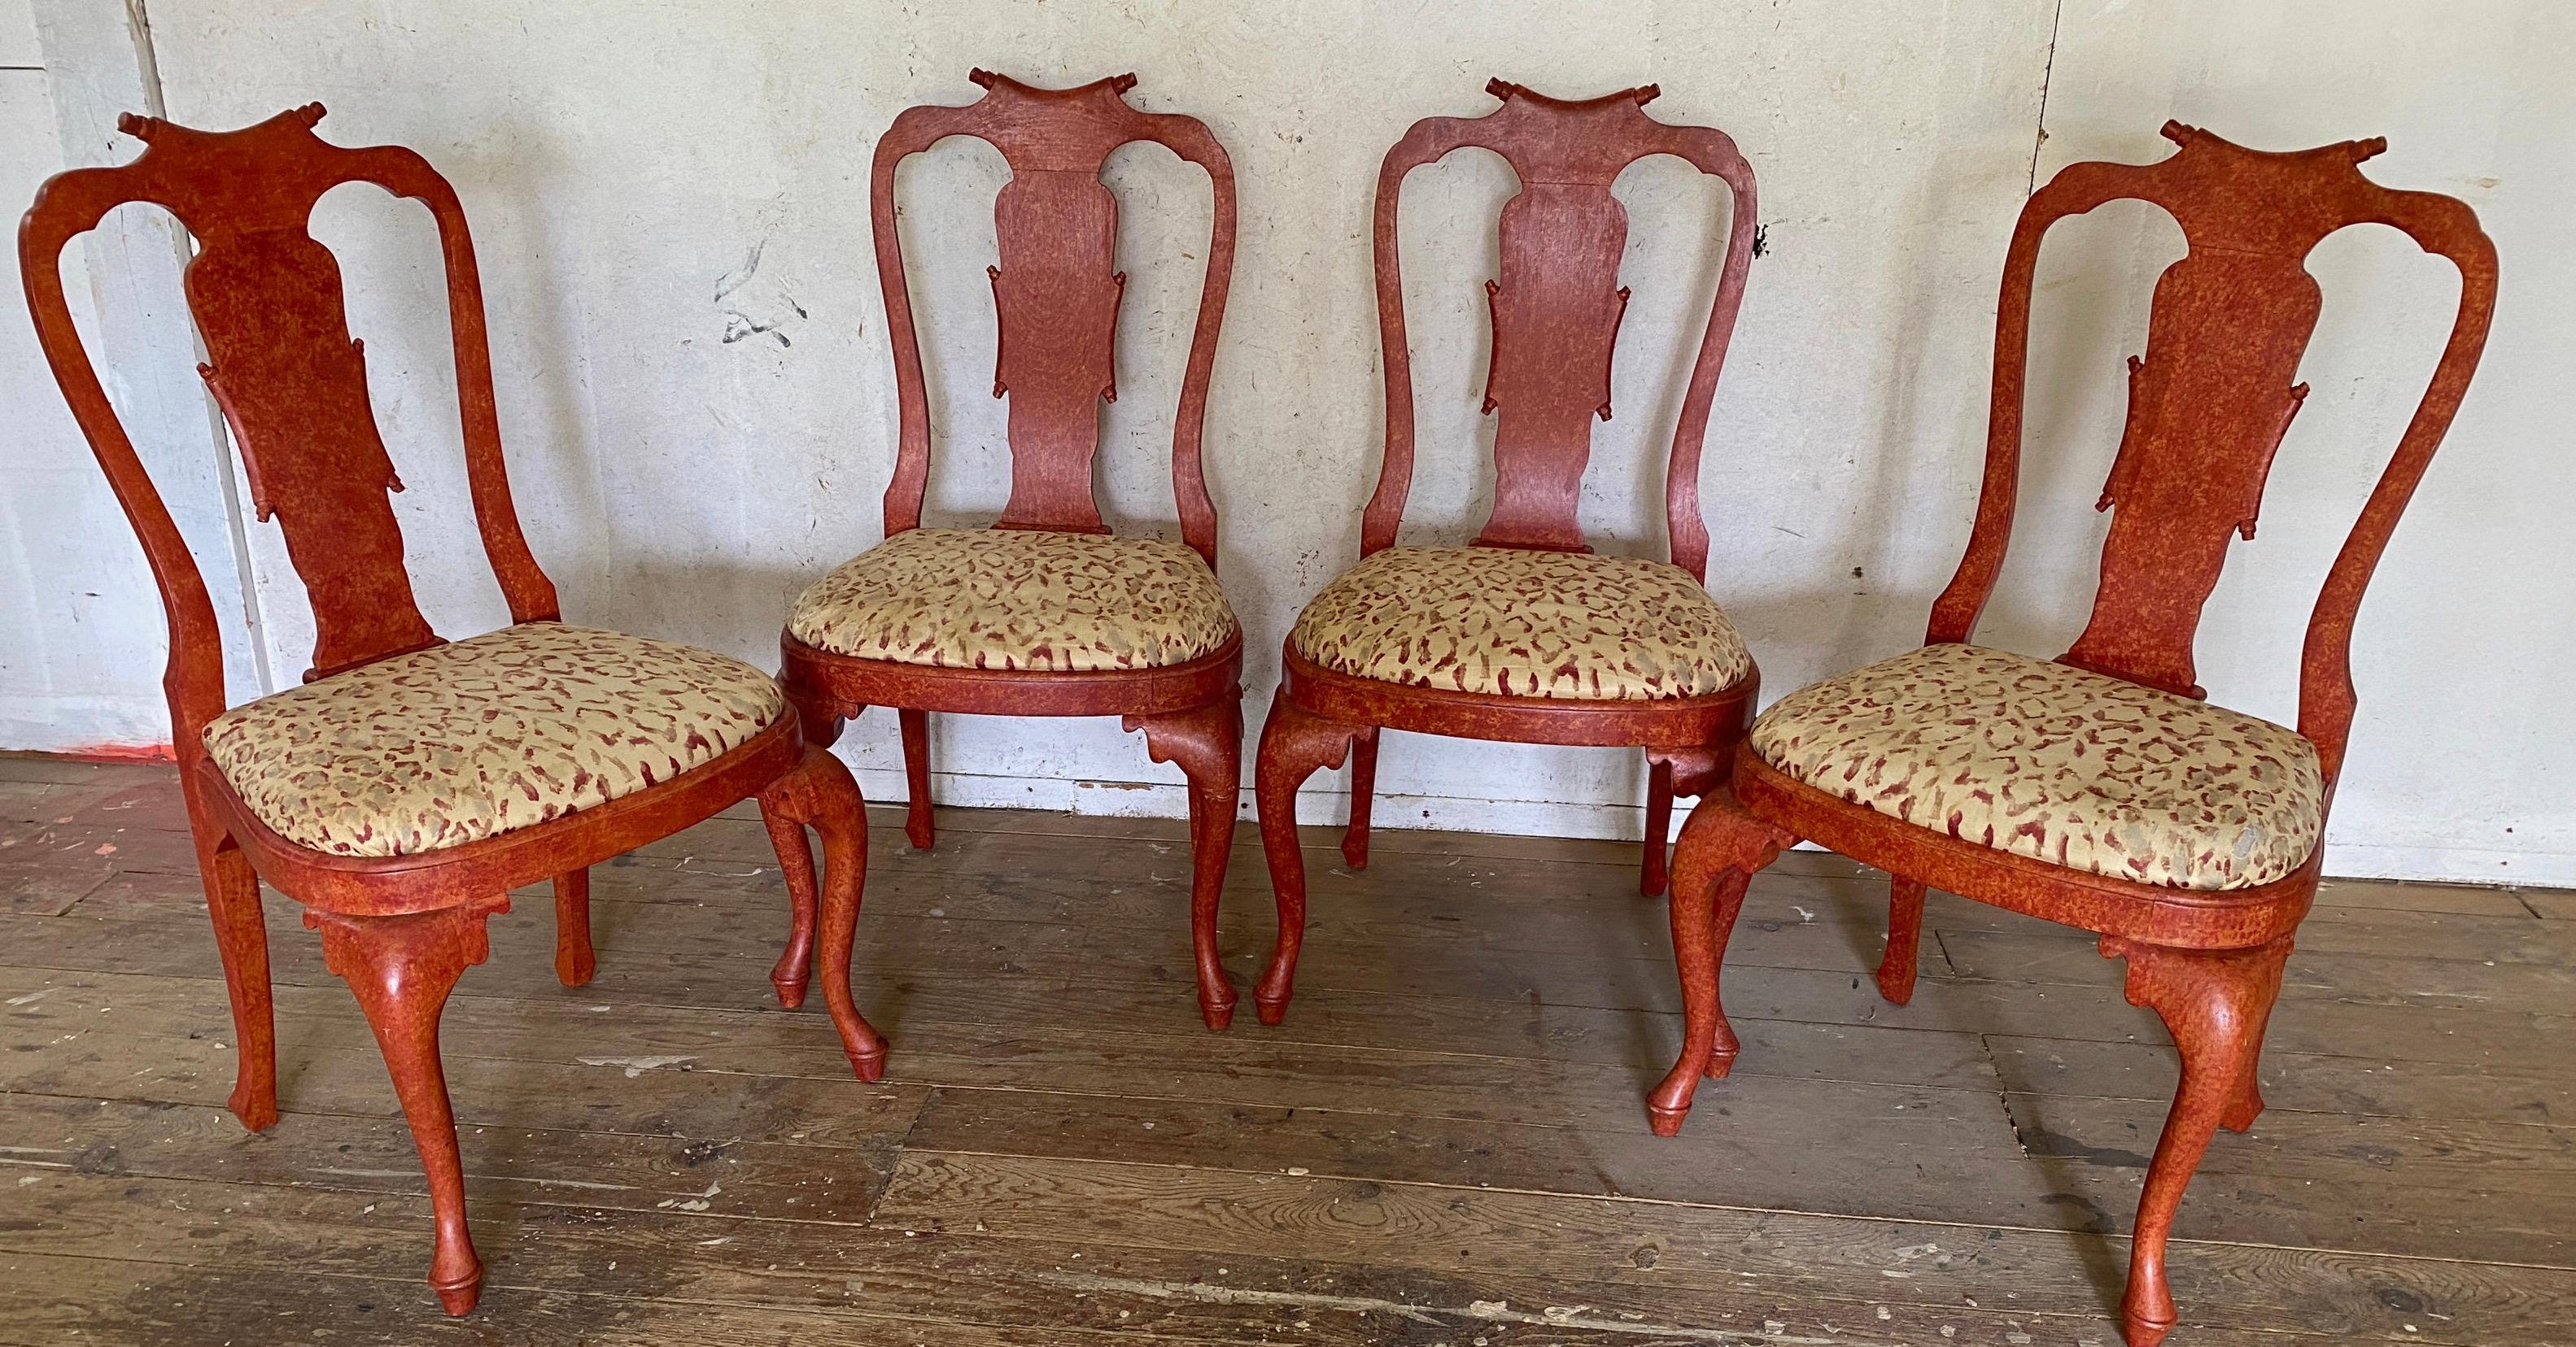 Wonderfully stylish set of 4 Italian Rococo style red painted side chairs upholstered in red dappled ivory chintz. One chair upholstery shows wear exposing base material.
Search terms: Queen Anne Style, Louis XV provincial style, Hollywood Regency